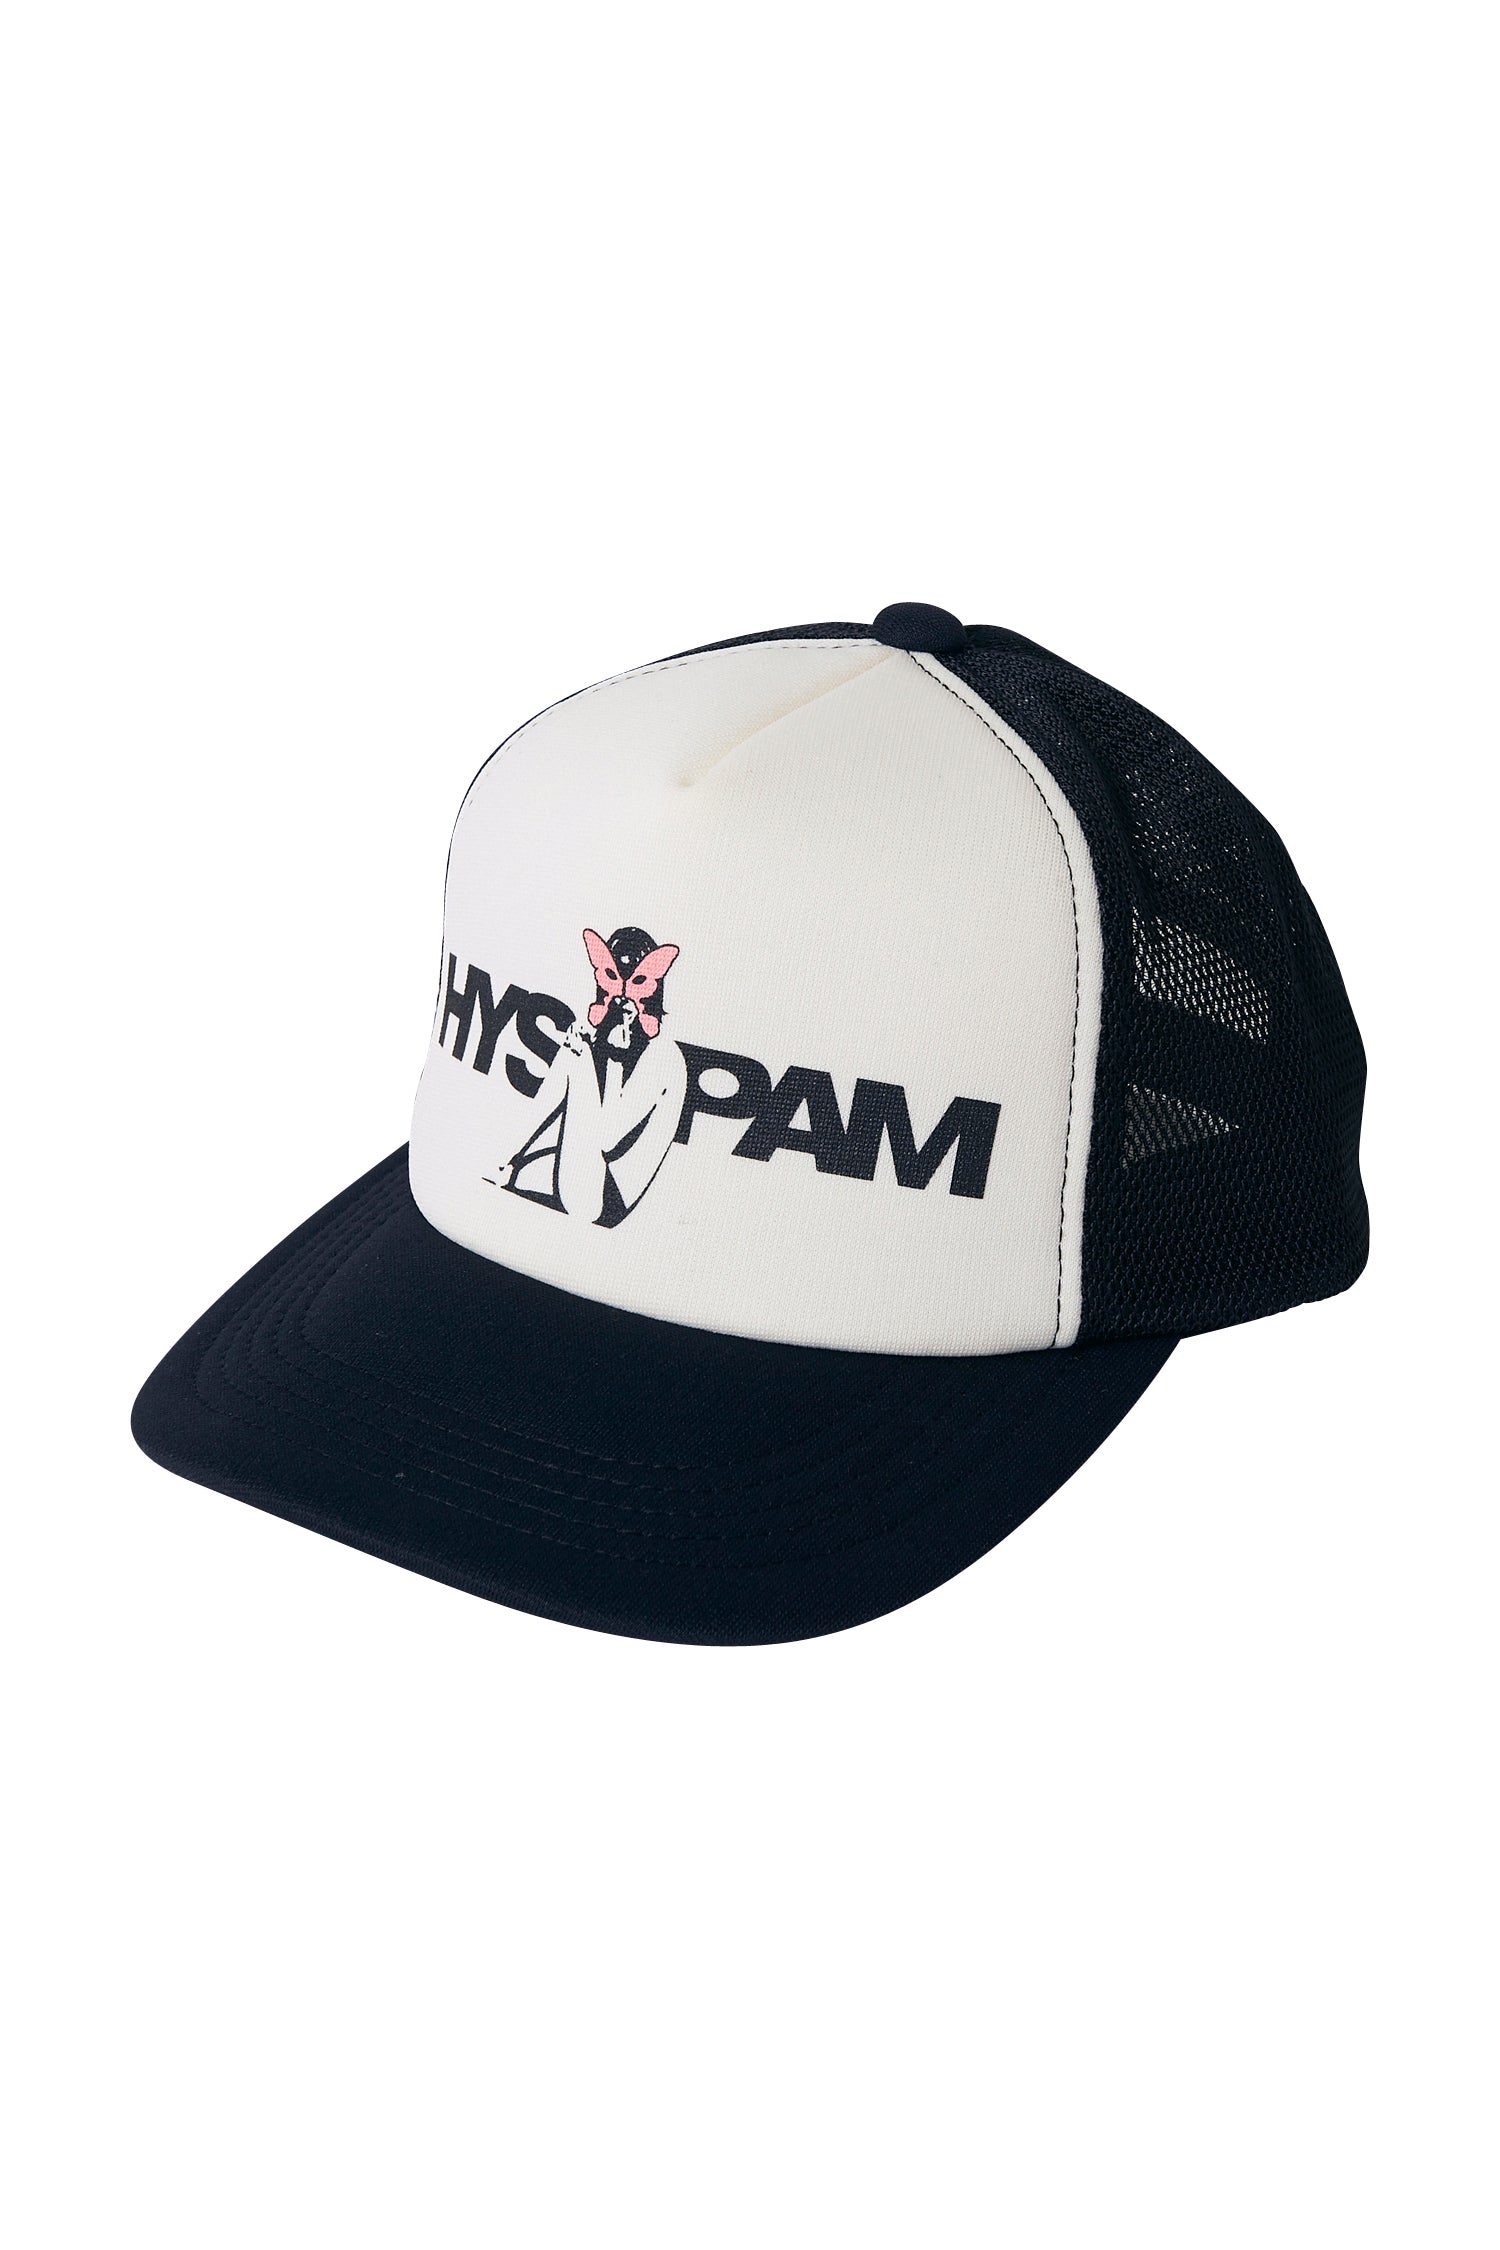 The PAM X HYSTERIC GLAMOUR - ALIEN GIRL TRUCKER CAP BLACK available online with global shipping, and in PAM Stores Melbourne and Sydney.